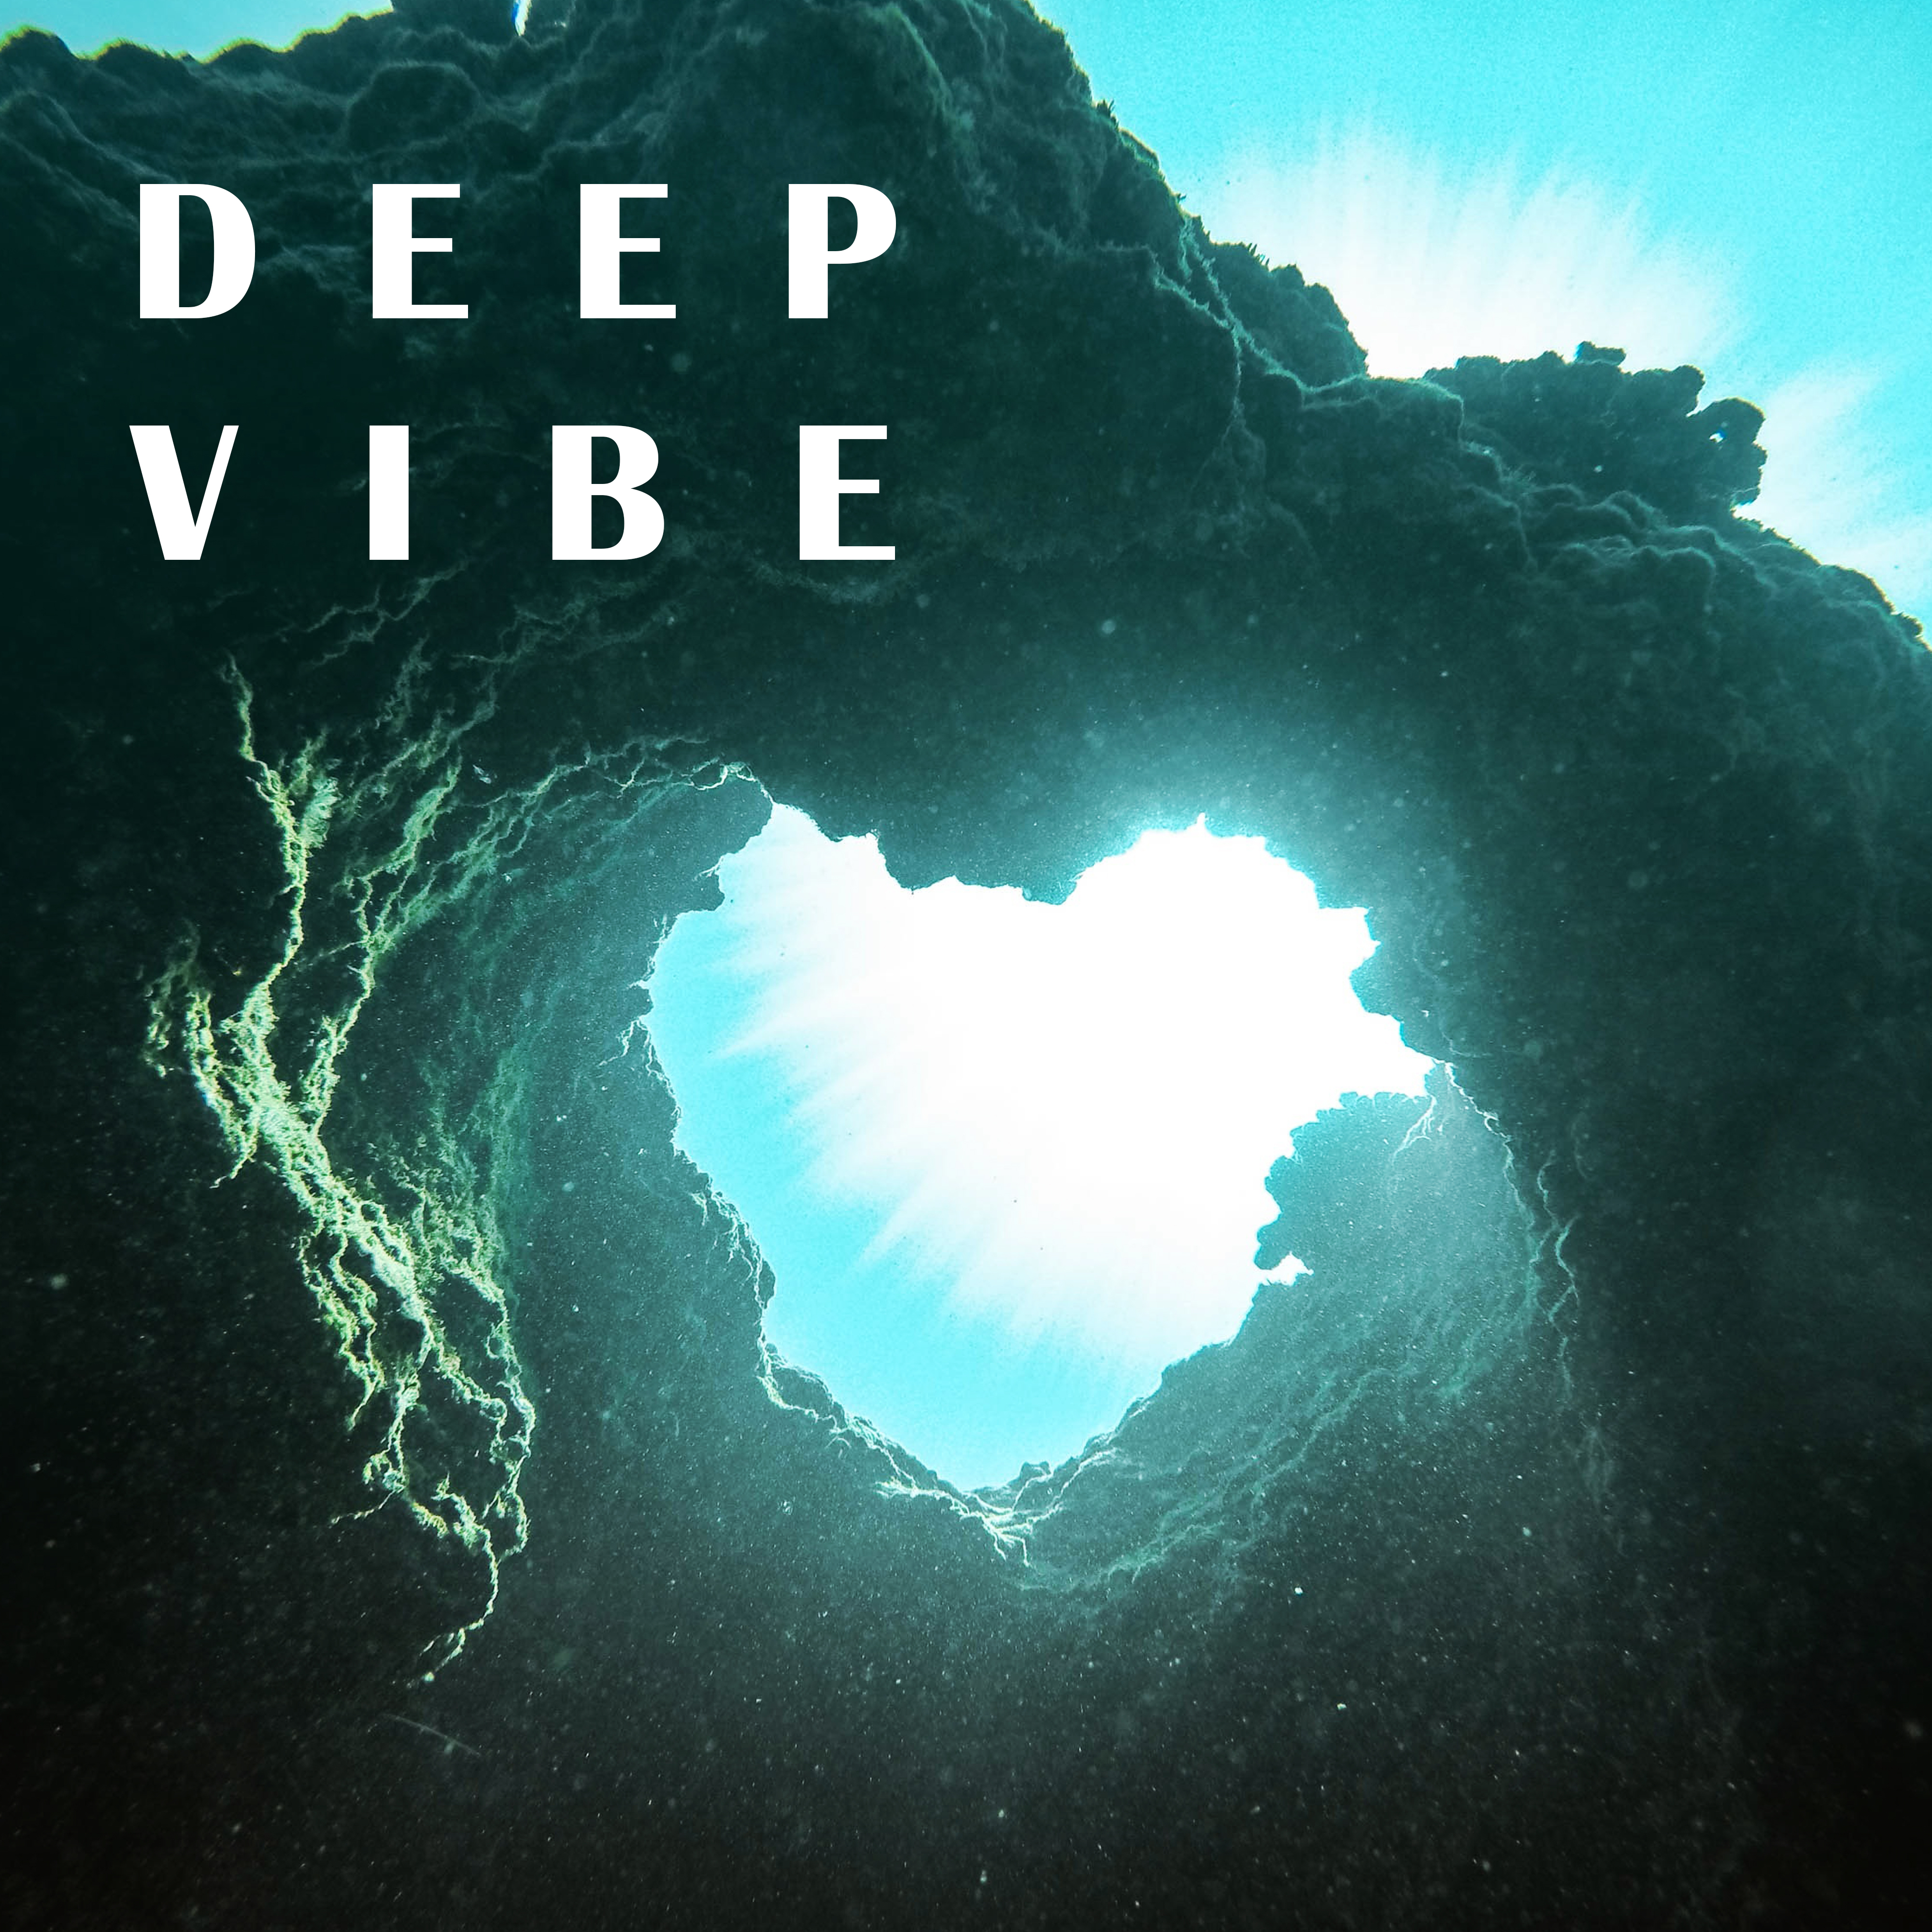 Deep Vibe – Sensual Music, Soothing Chill Out Vibrations, Deep Relaxation, Chill Out 2017